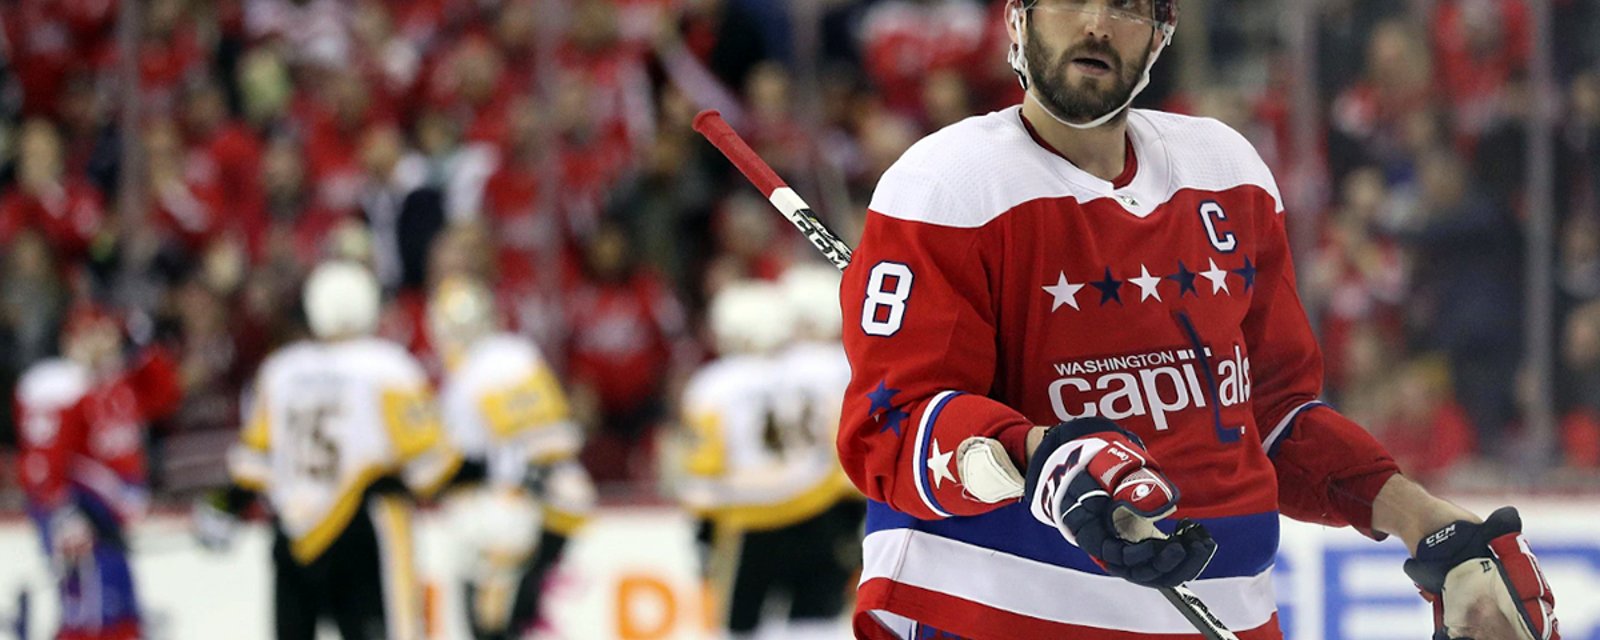 ICYMI: Ovechkin faces one game suspension